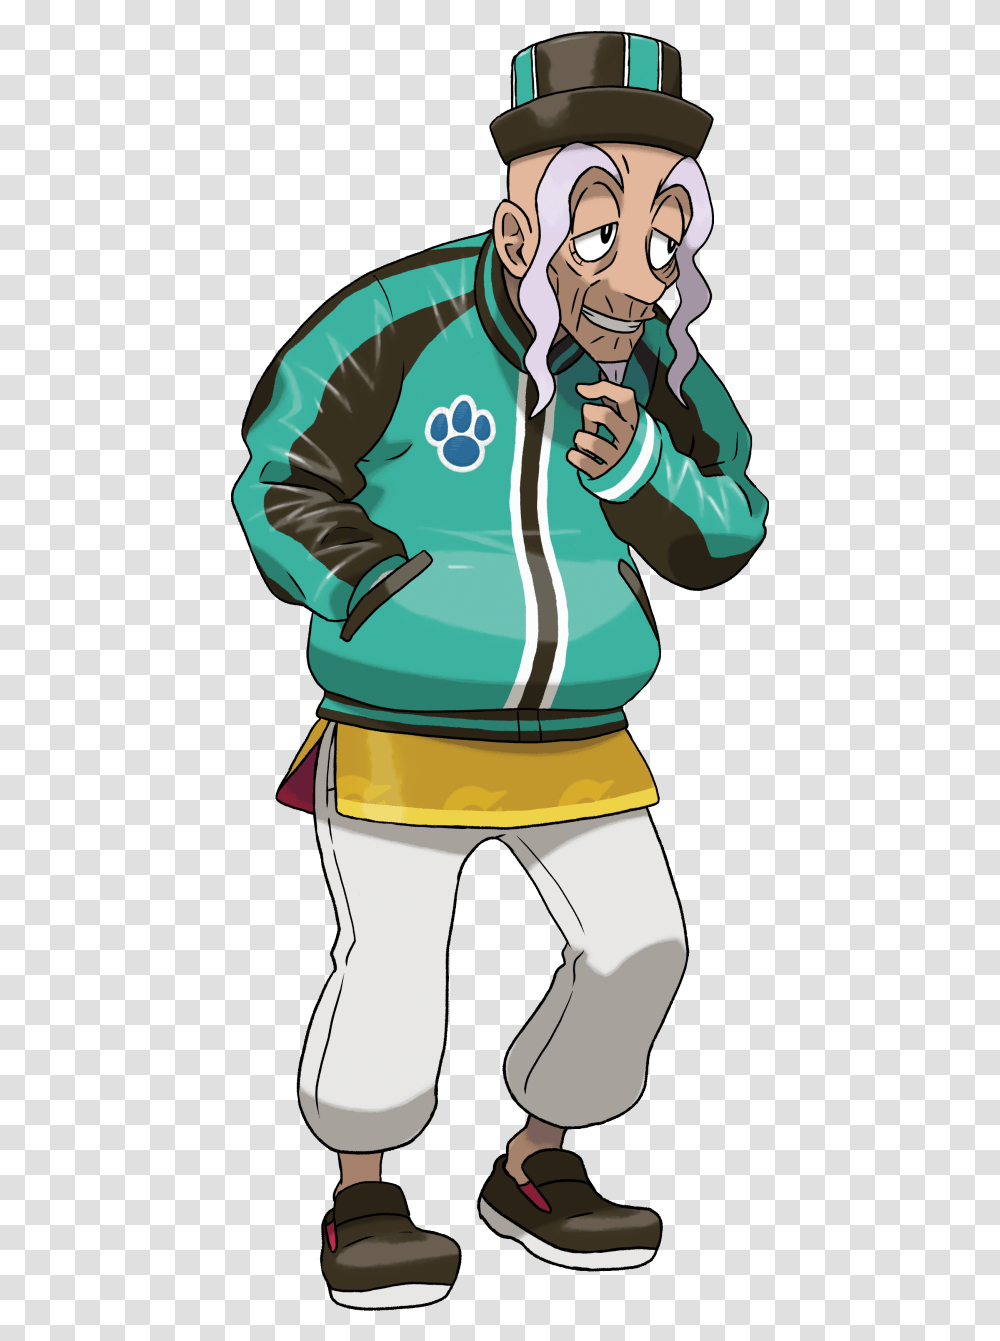 Mustard Pokemon Sword And Shield New Characters, Clothing, Person, Coat, Sleeve Transparent Png